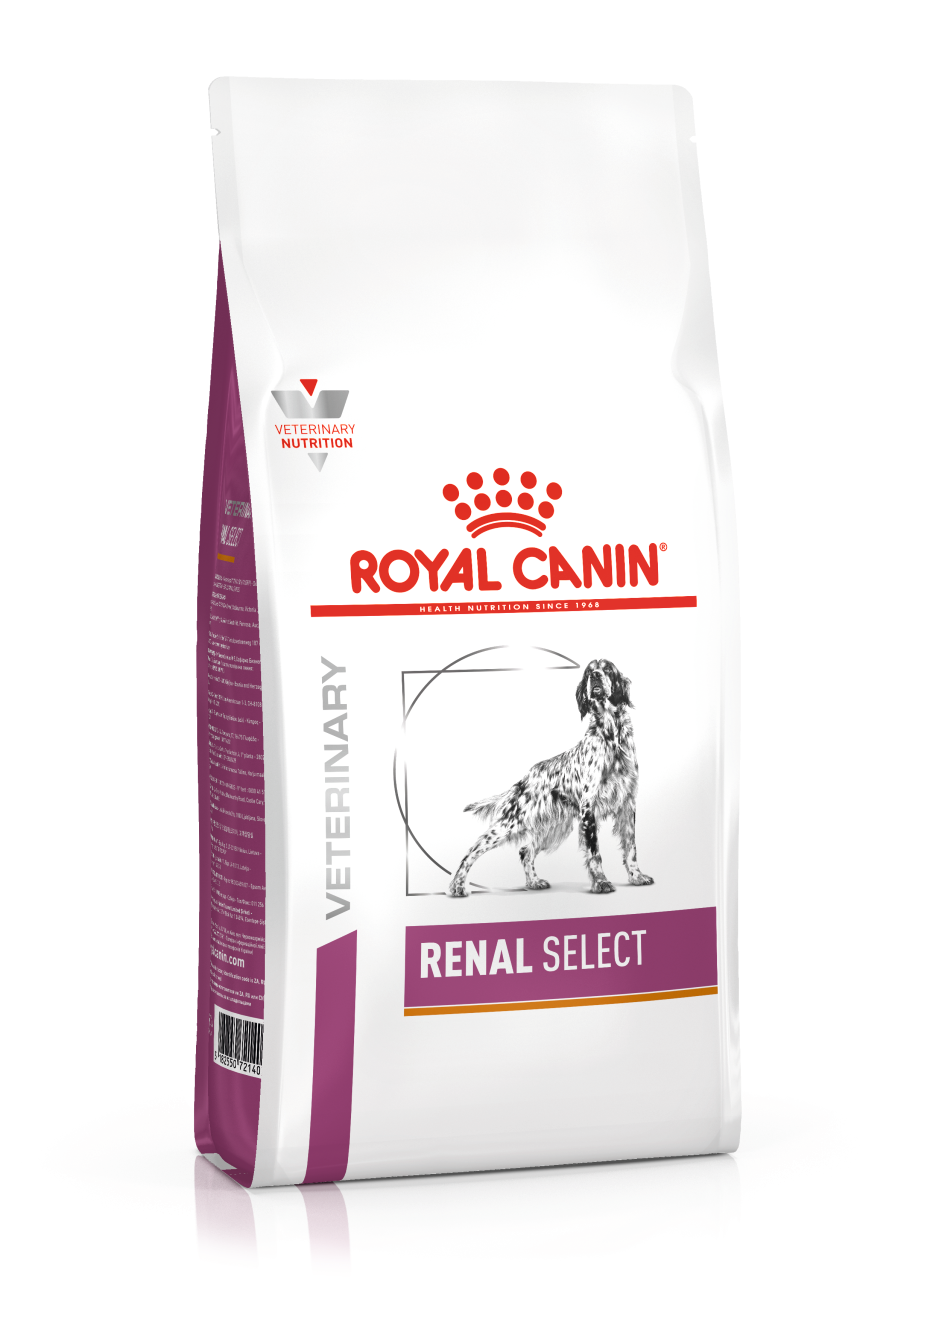 Royal Canin Renal Special hond 1 x 10 kg